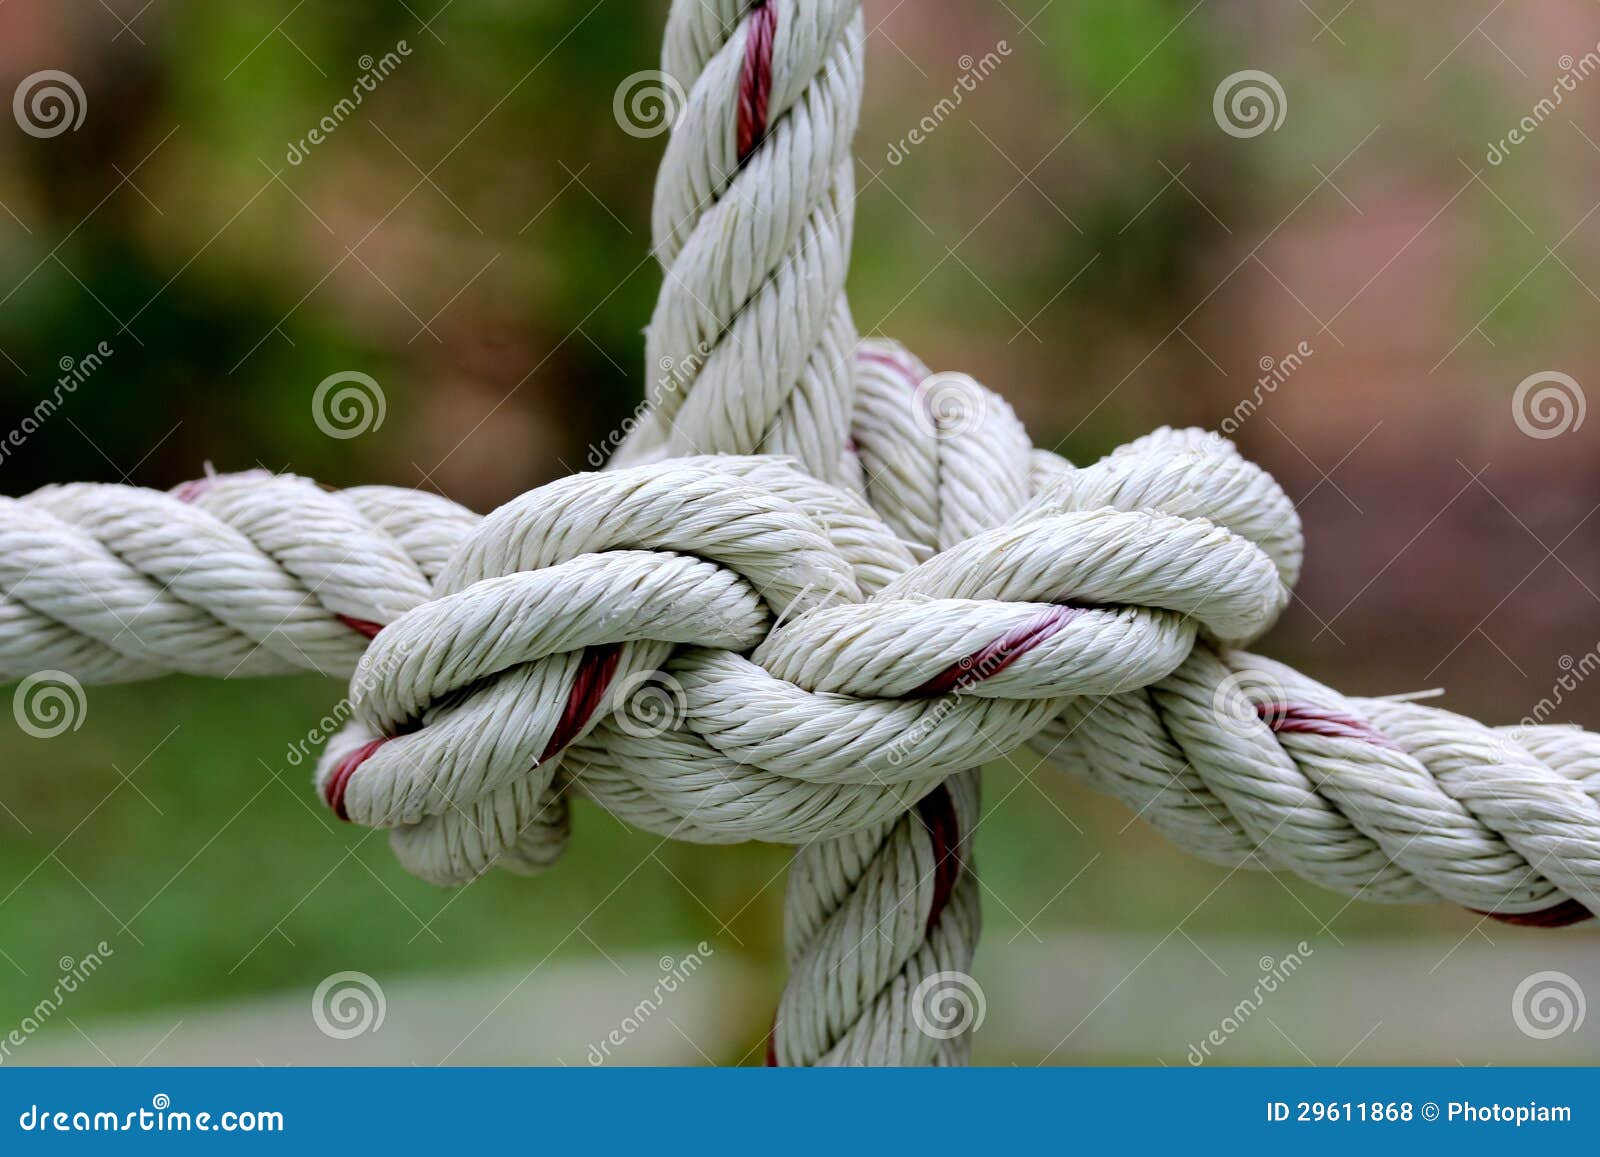 Strong knot tied by a rope stock photo. Image of detail 29611868